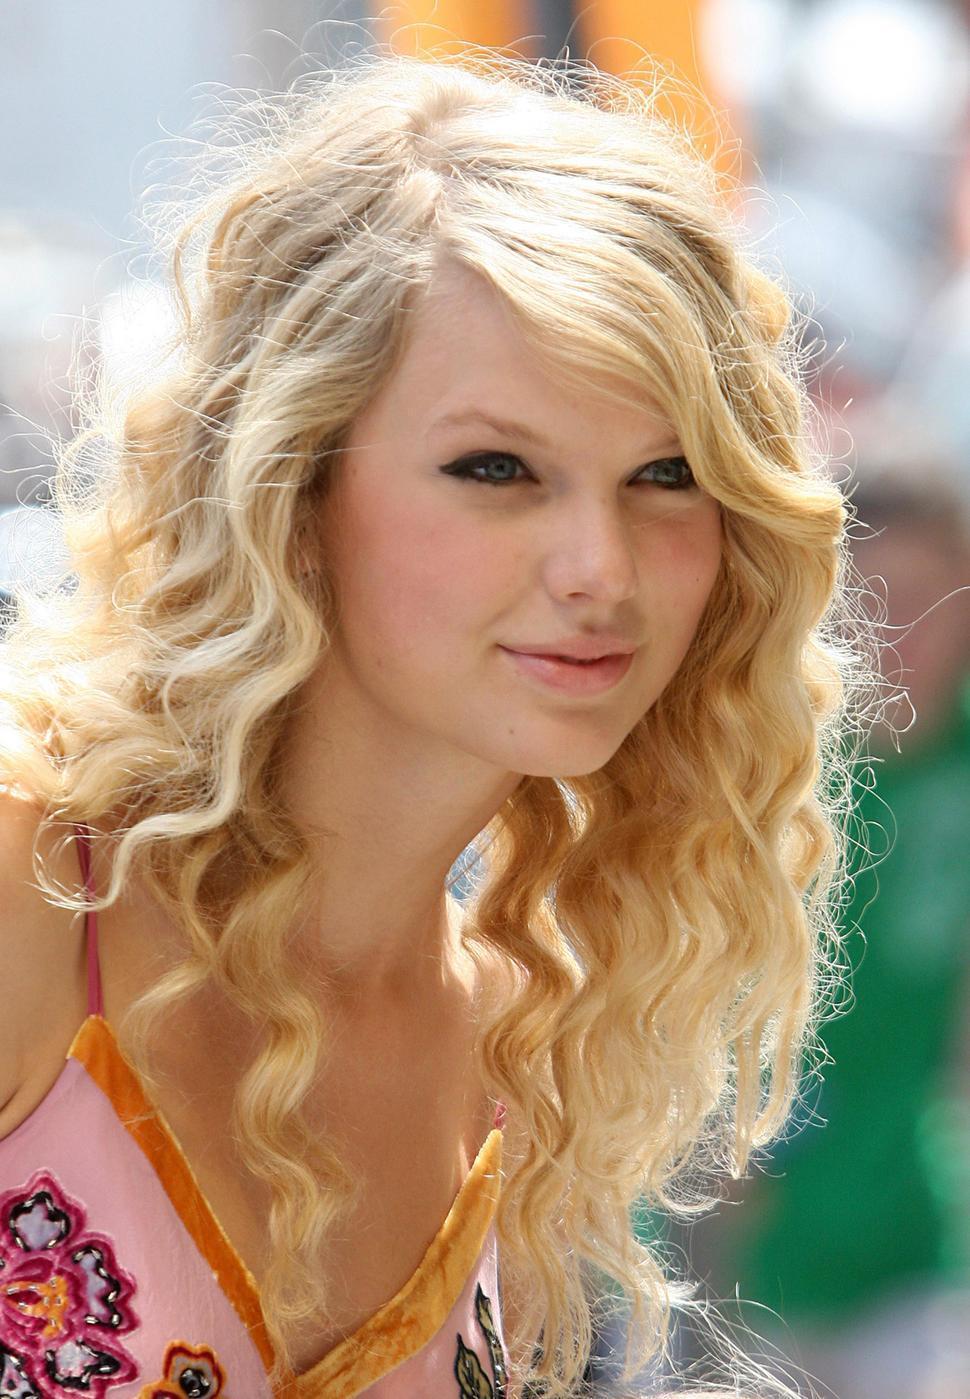 Amazing Singers image Taylor Swift HD wallpaper and background